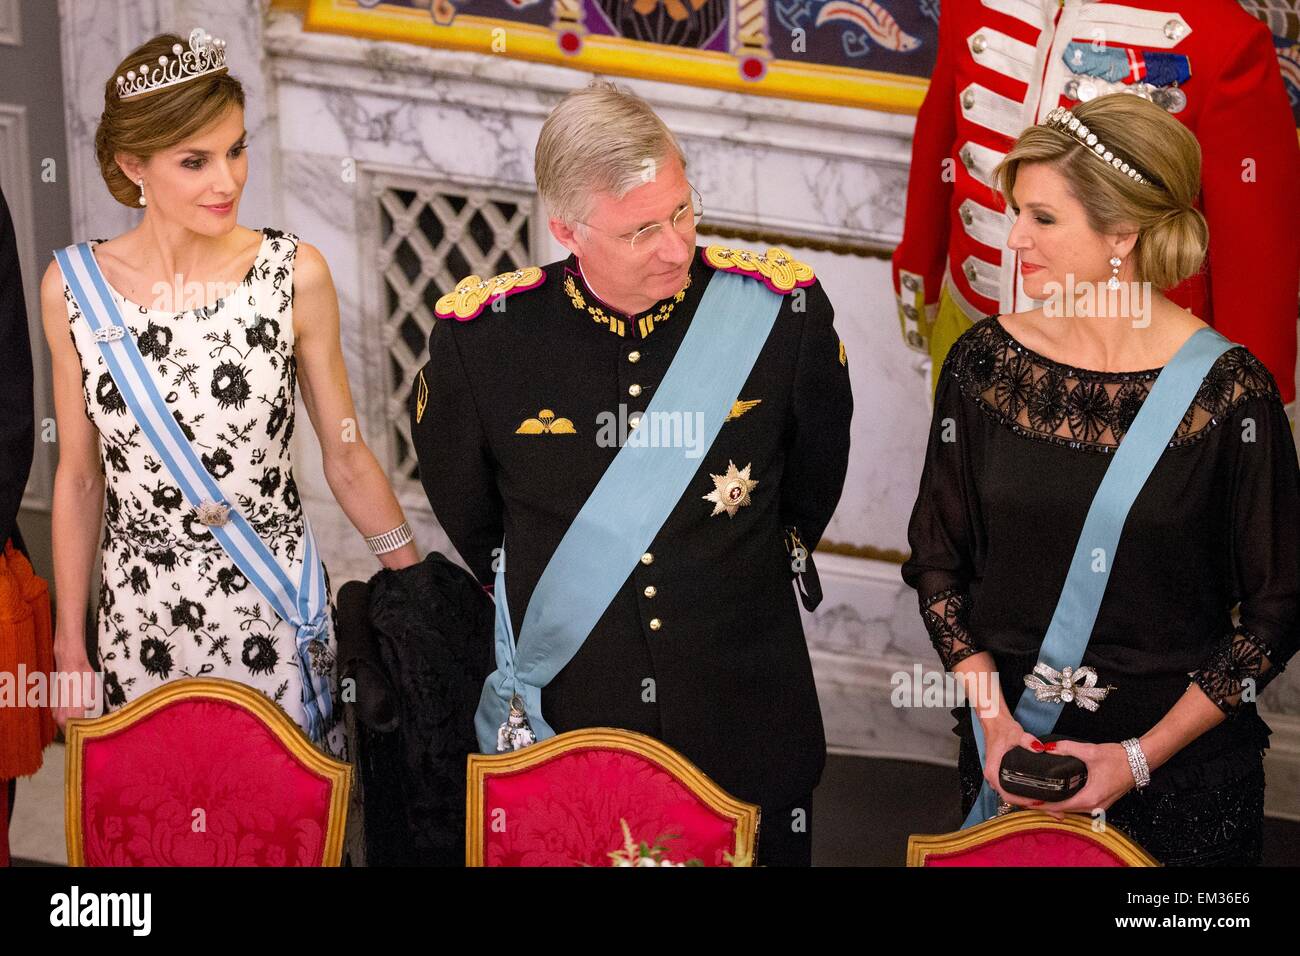 The King and #Queen of Spain Attend a Glittering Gala Dinner in Copenhagen!  Plus, More #Royal News! 